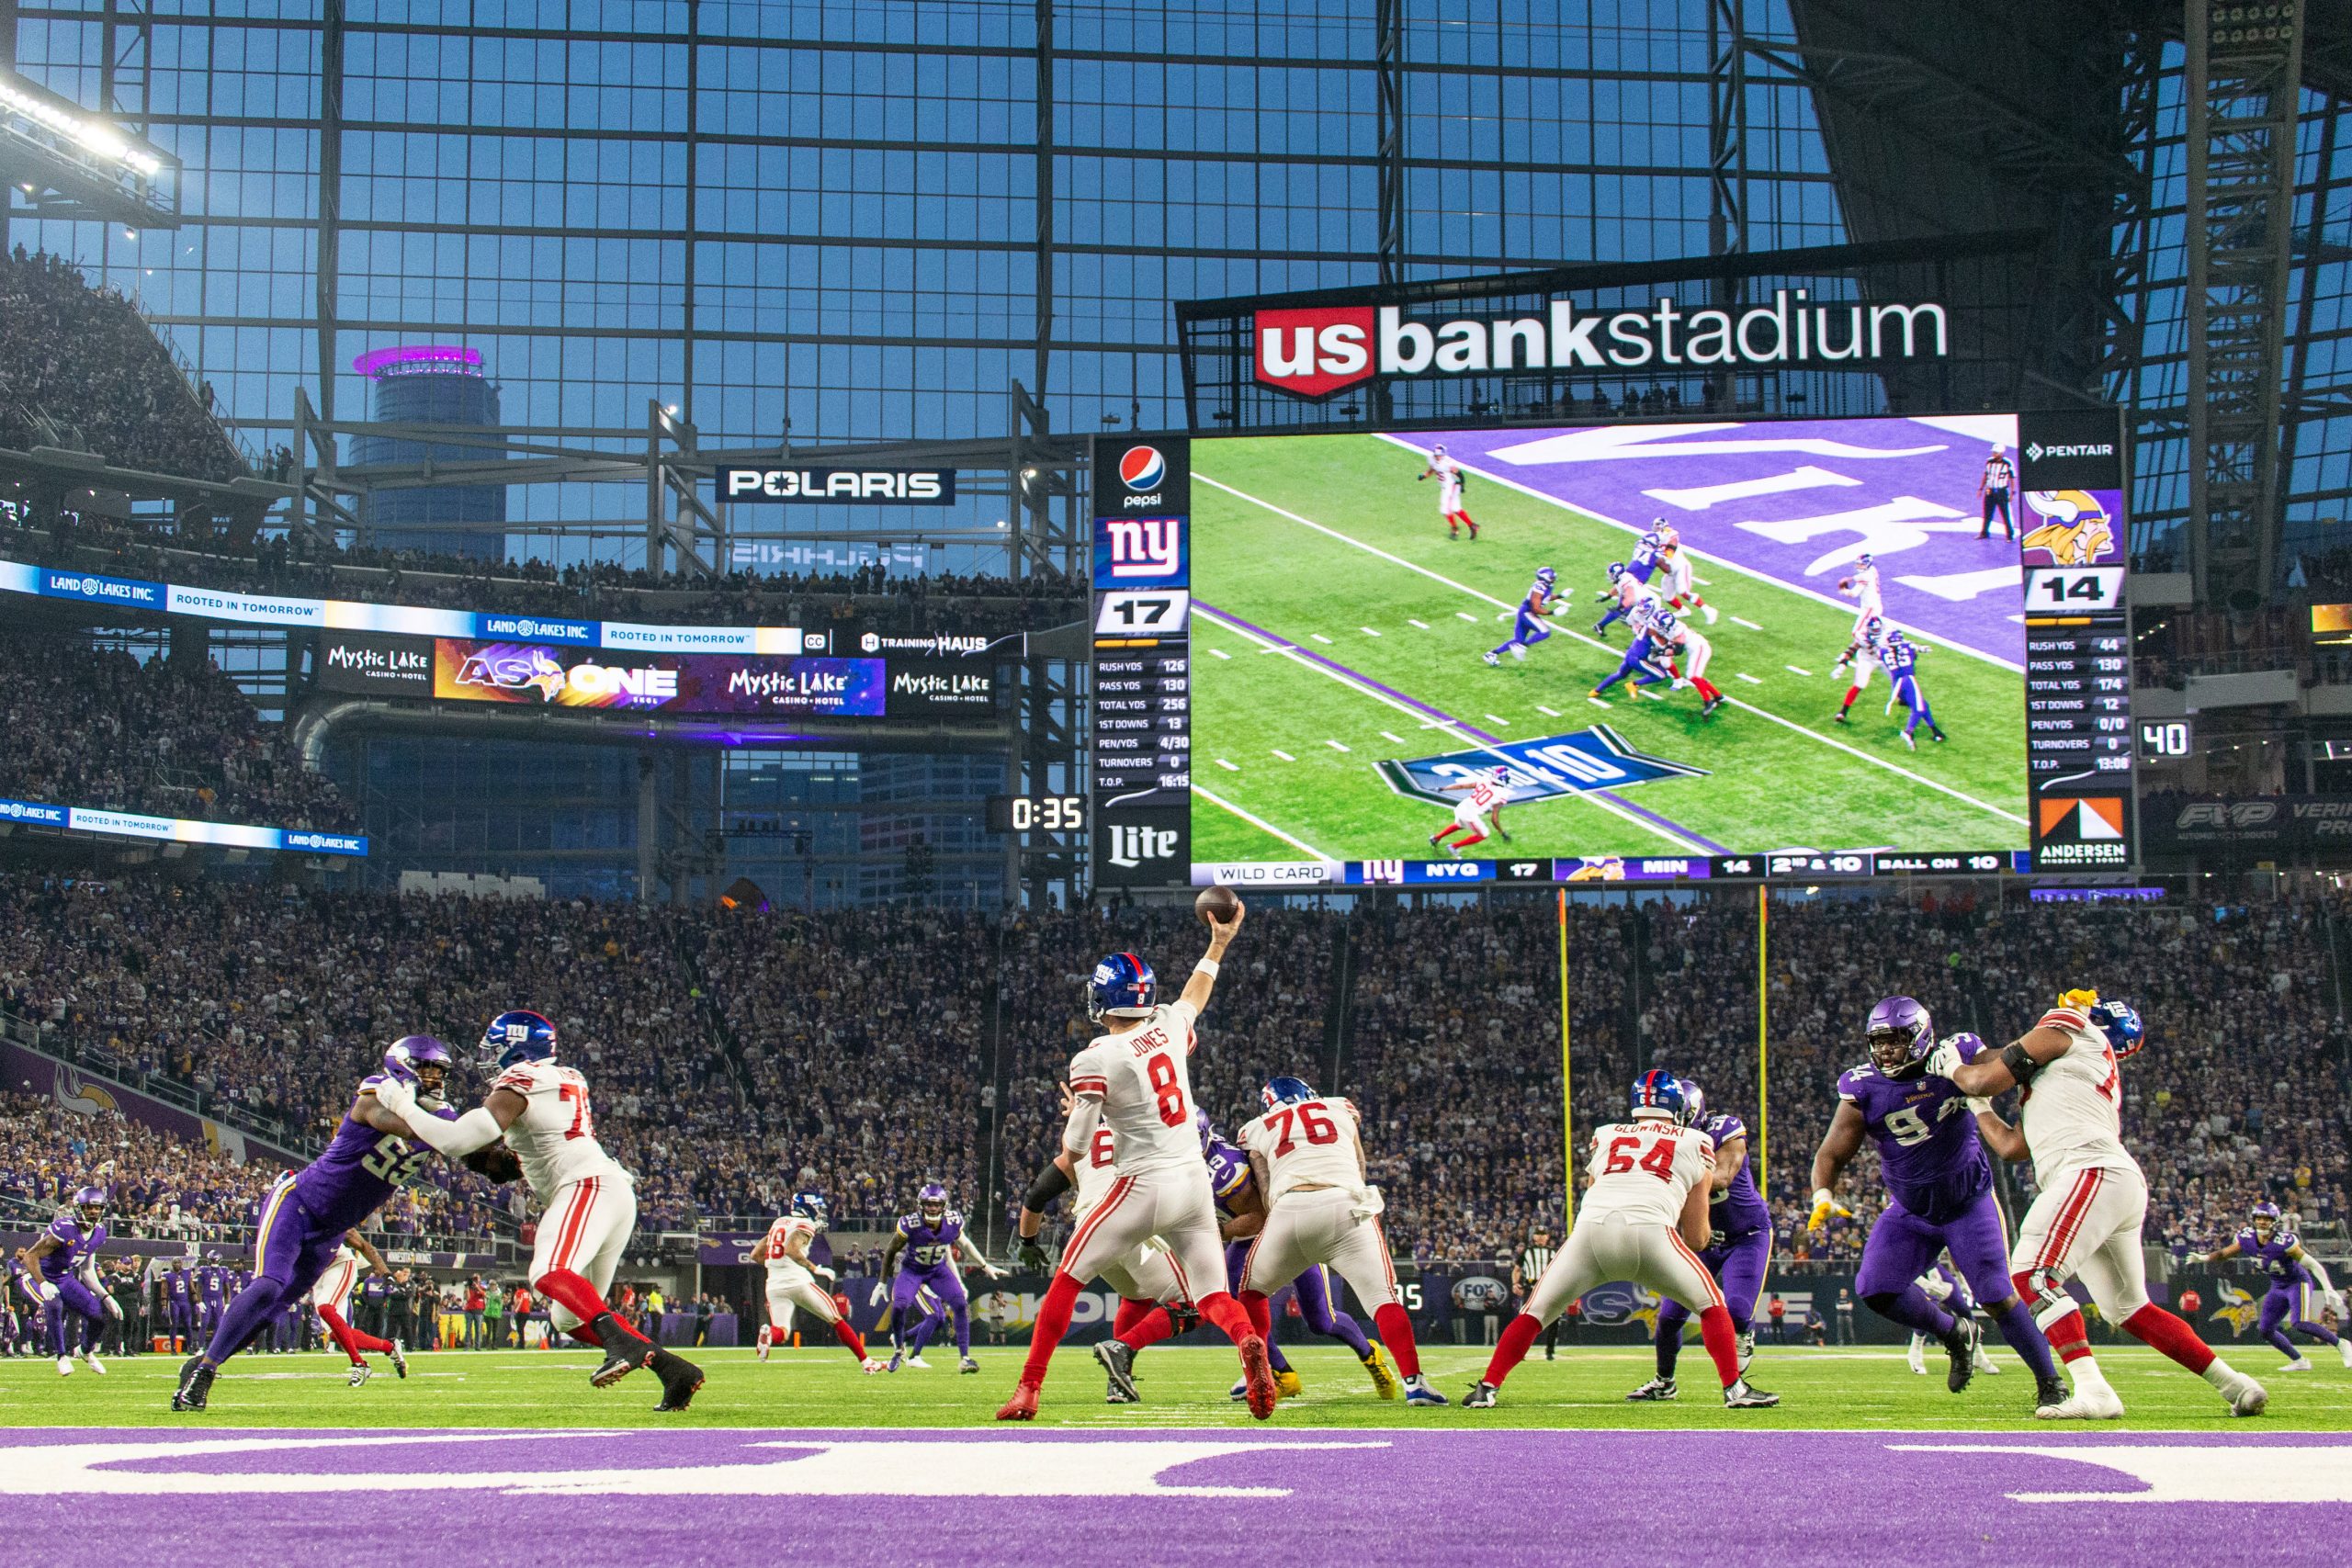 MINNEAPOLIS, MN - JANUARY 15: New York Giants quarterback Daniel Jones 8 throws the ball during the NFL, American Football Herren, USA game between the New York Giants and Minnesota Vikings on January 15th, 2023, at U.S. Bank Stadium in Minneapolis, MN. Photo by Bailey Hillesheim/Icon Sportswire NFL: JAN 15 NFC Wild Card Playoffs - Giants at Vikings Icon230115018